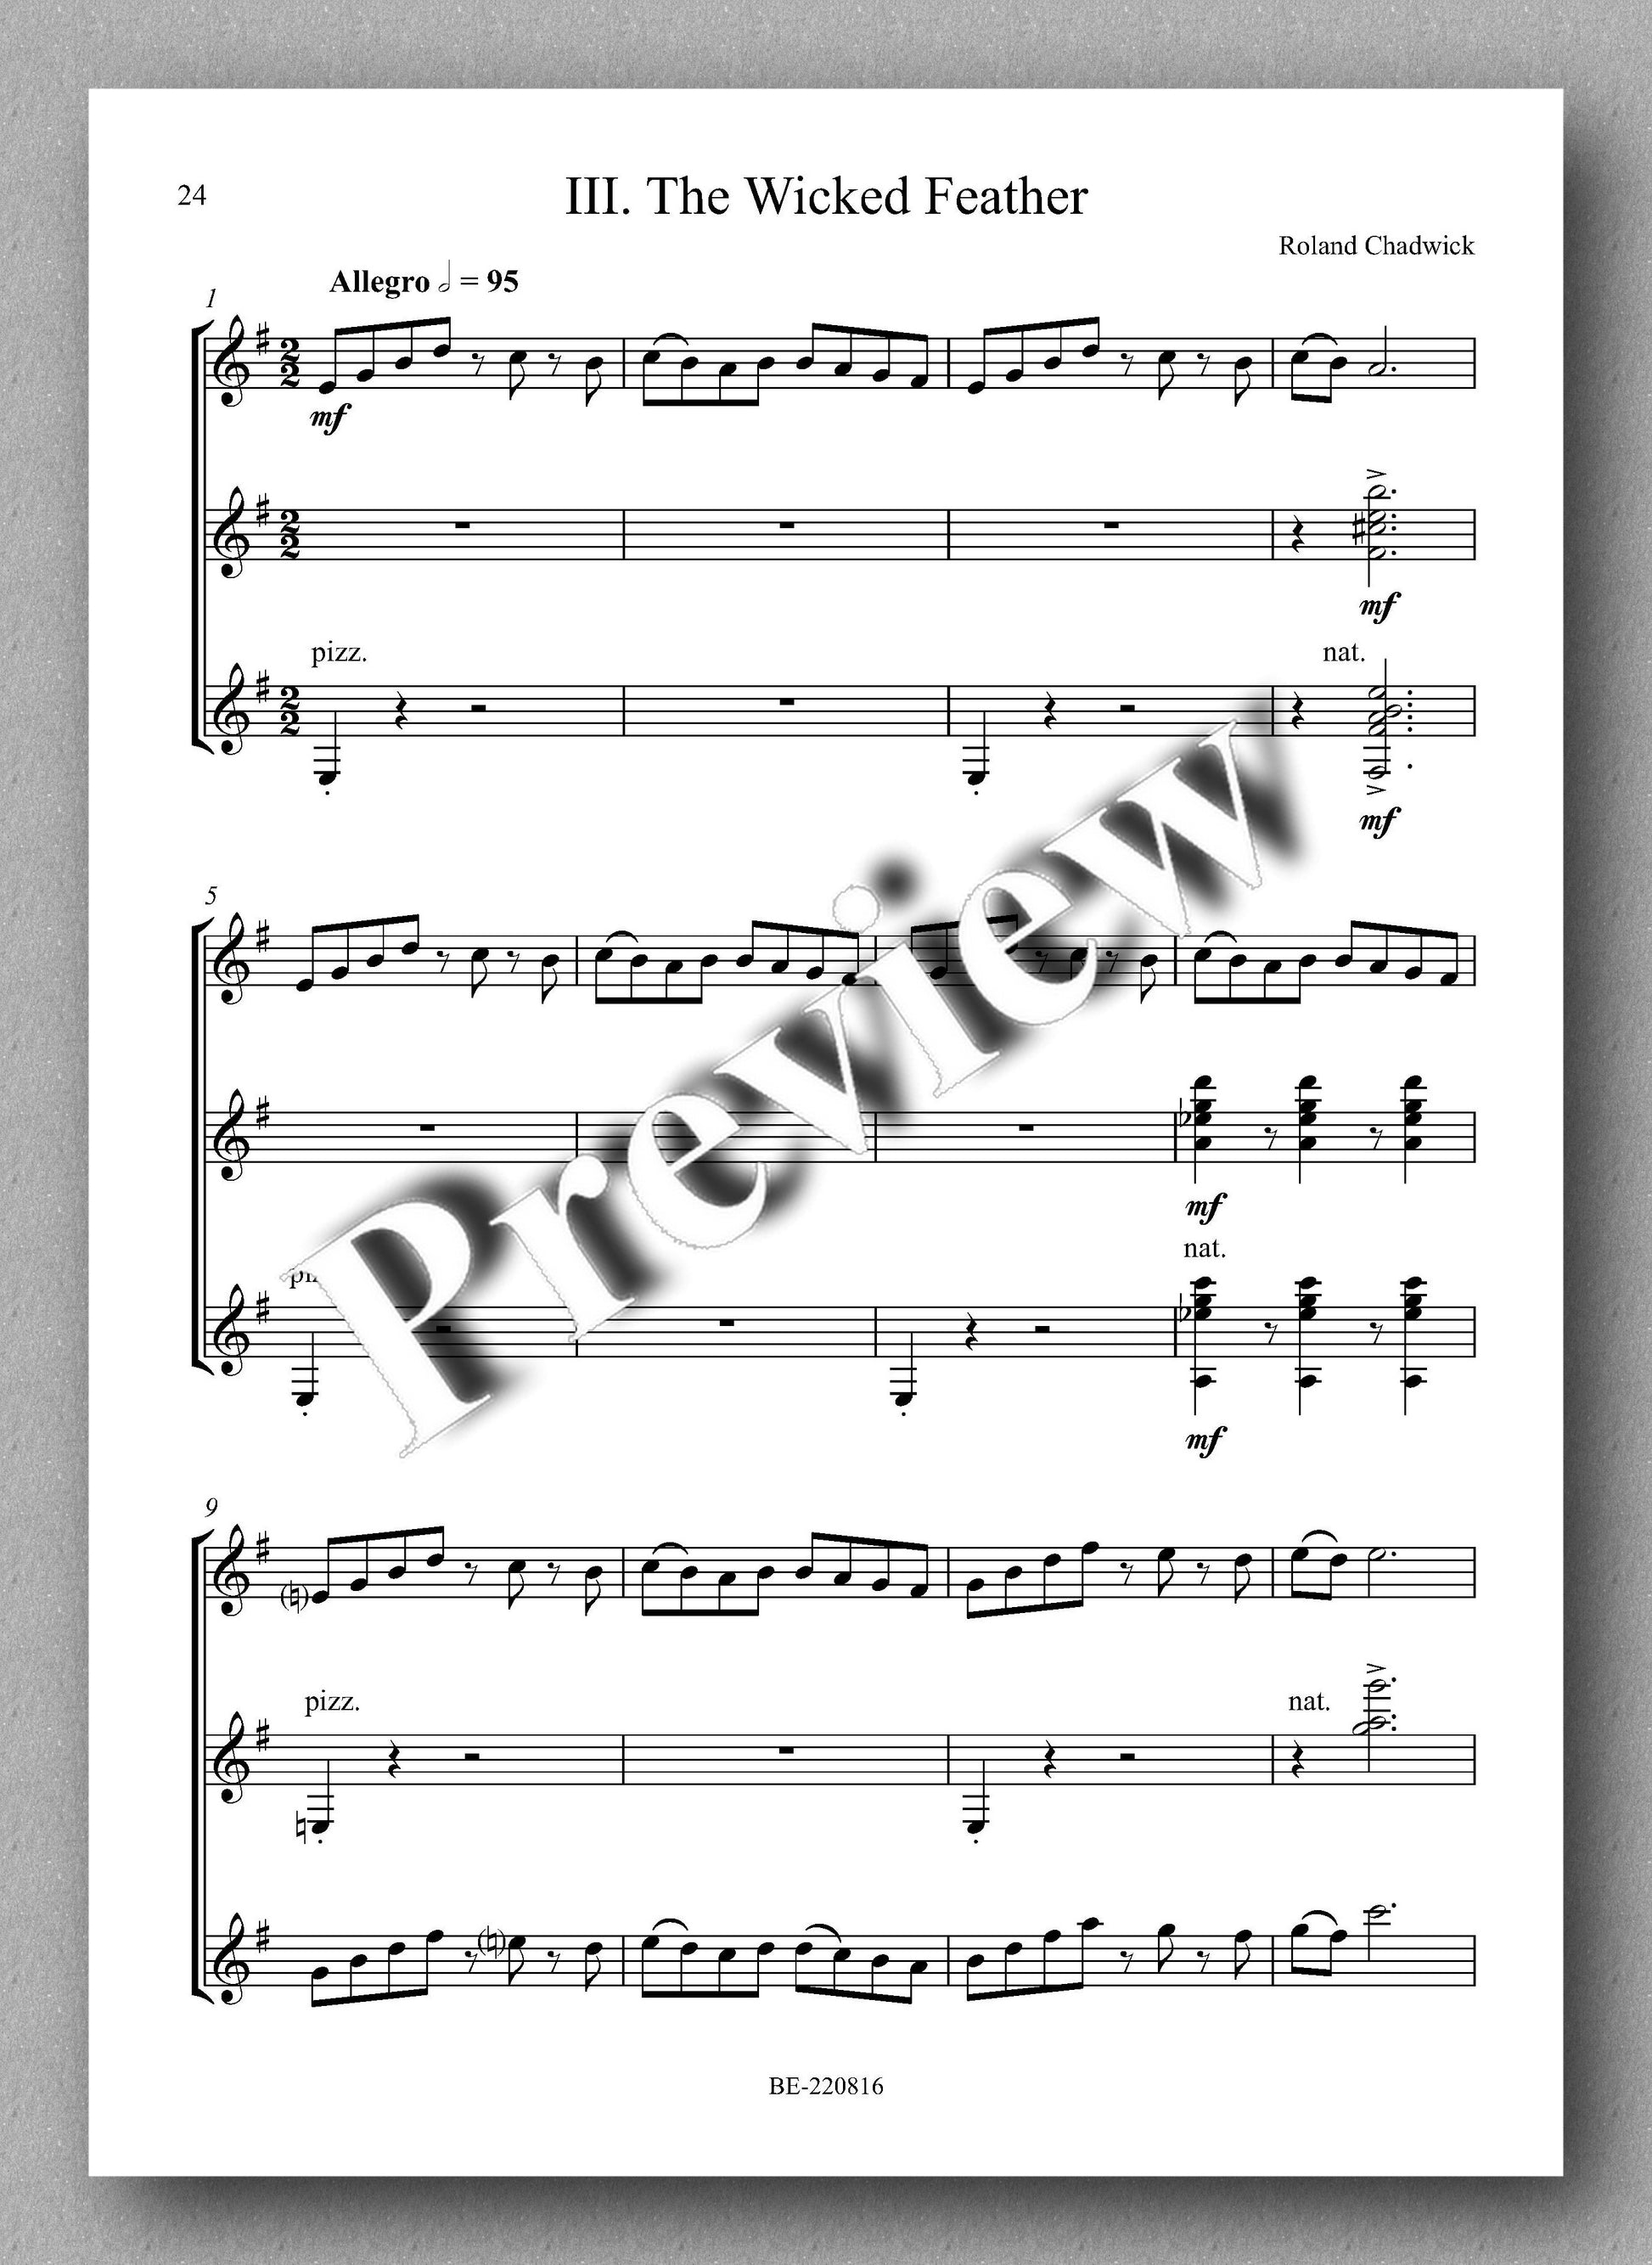 Roland Chadwick, Venus in Rags - preview of the music score 3